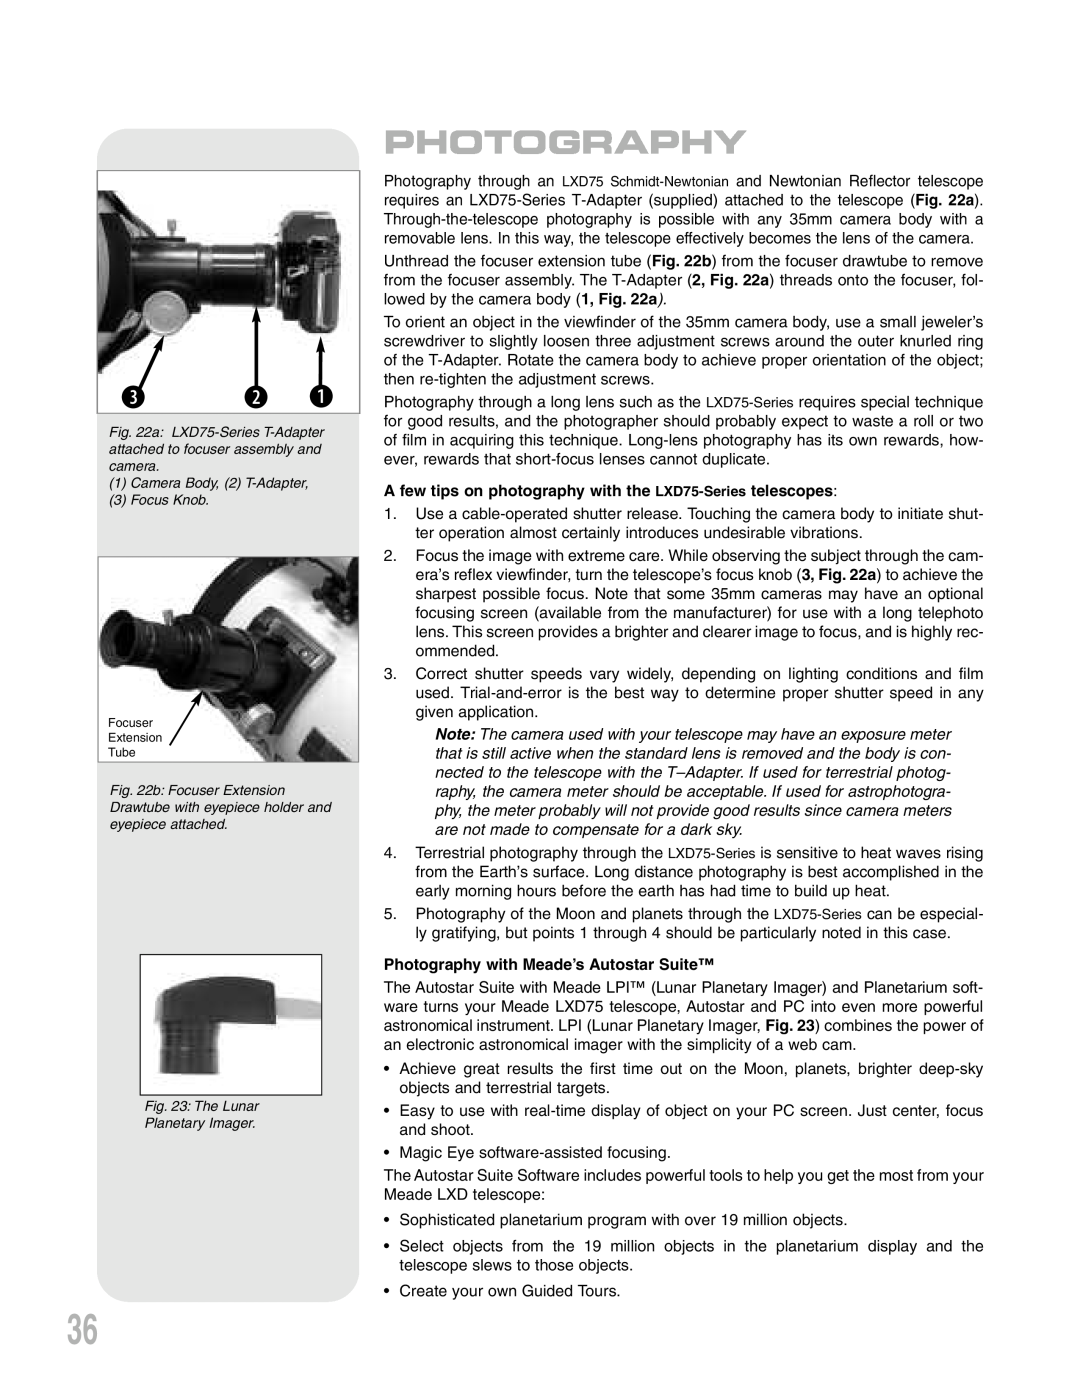 Meade LXD75 instruction manual d C B, Photography 